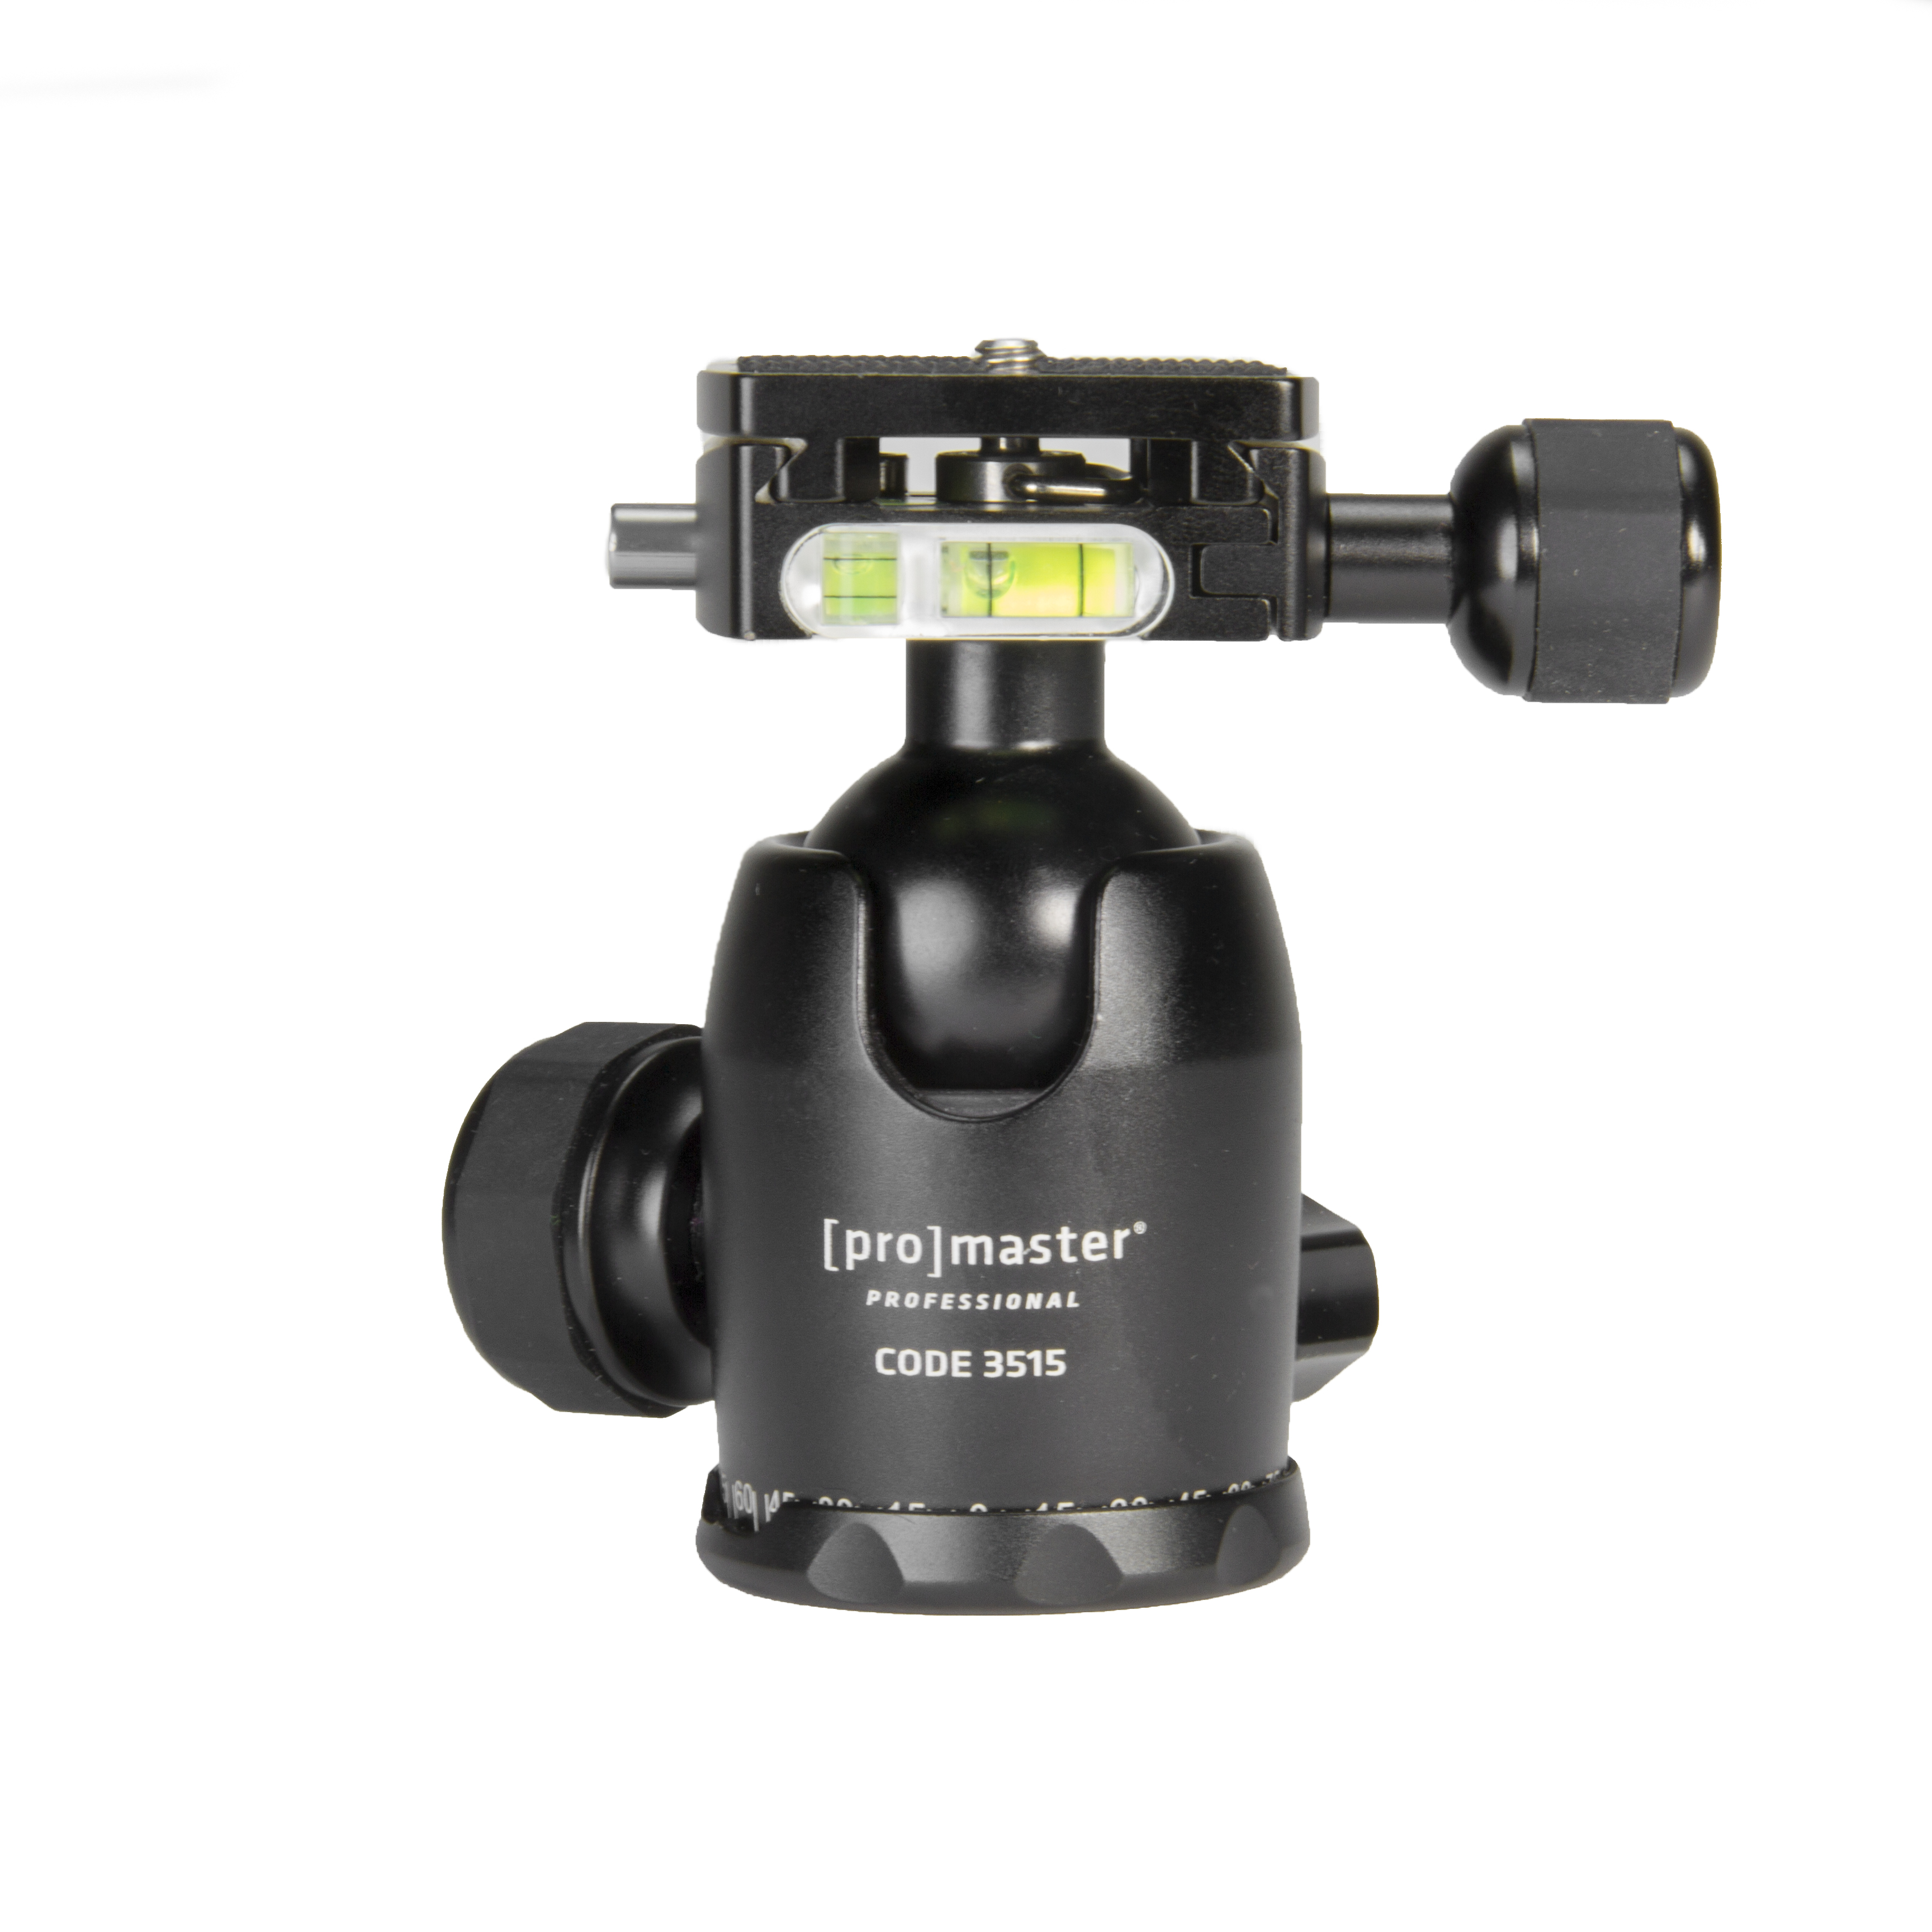 Promaster 3515 BS-18 Professional Ball  Head